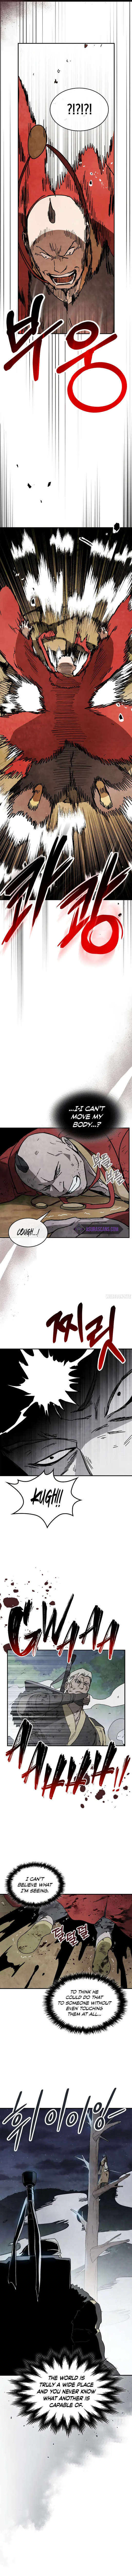 chronicles-of-the-martial-gods-return-chap-80-3